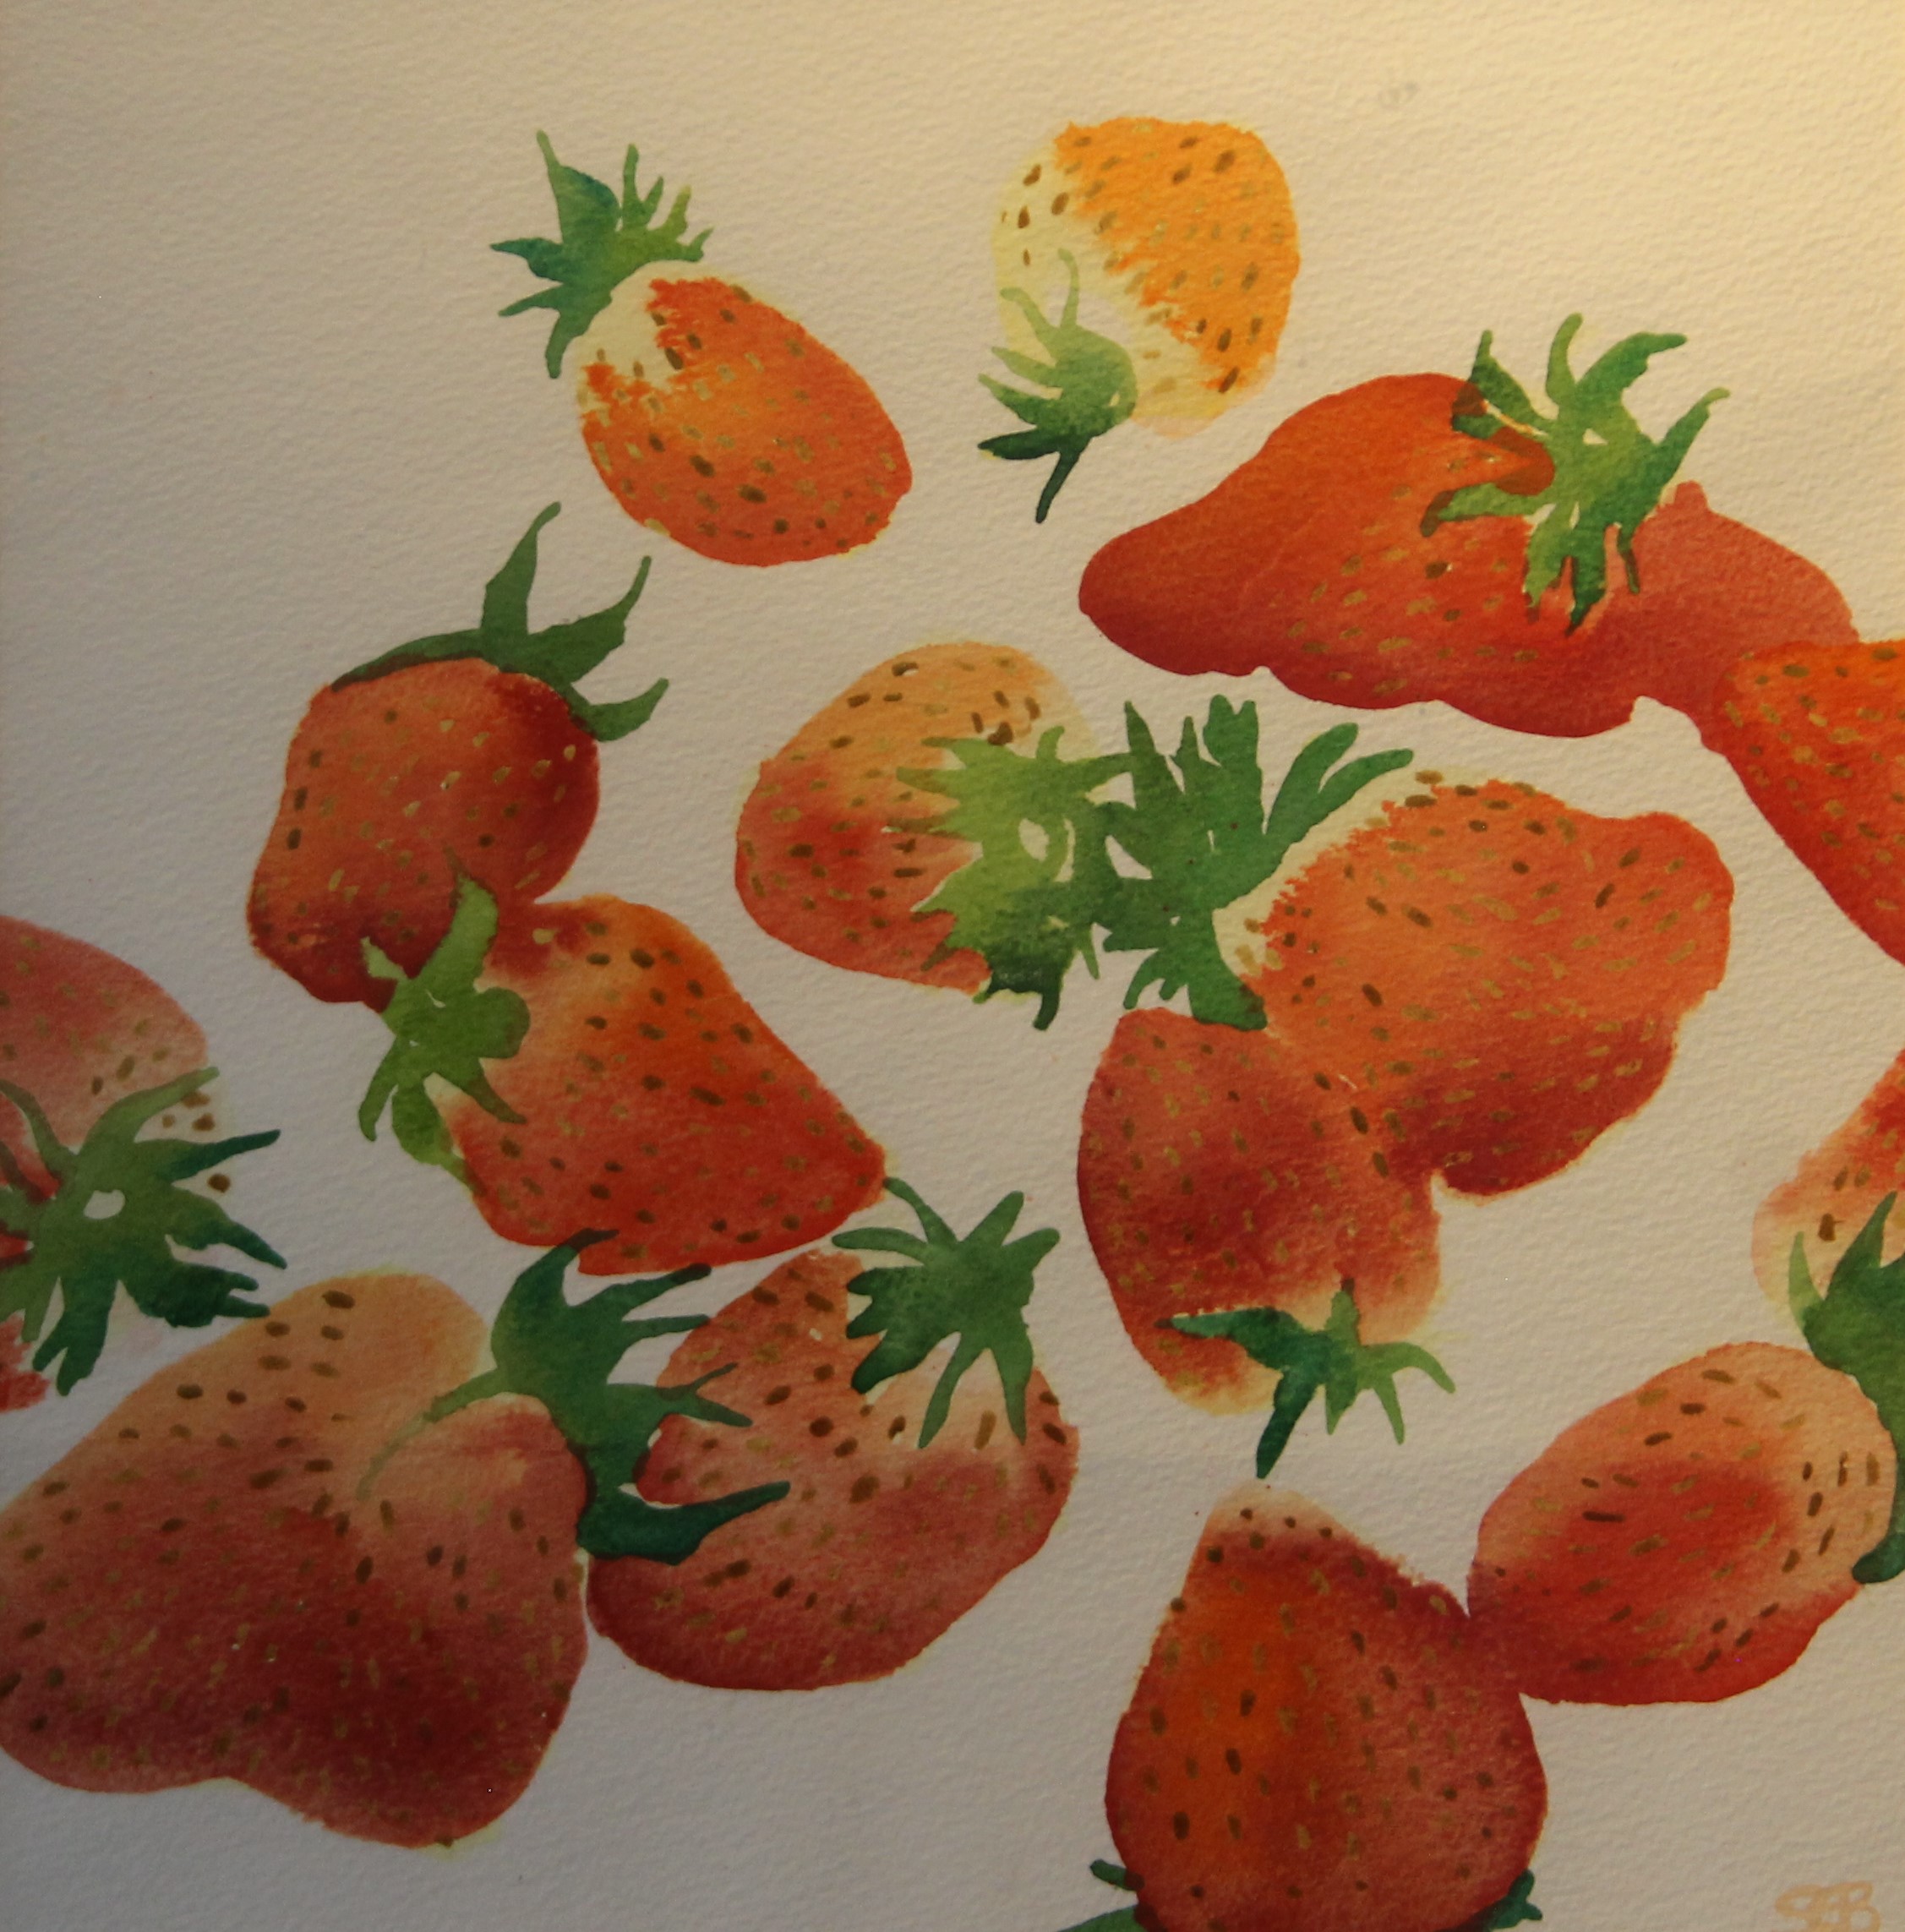 Strawberries, watercolour, initialled S.E.B, framed and glazed. 33.5 x 34.5 cm.